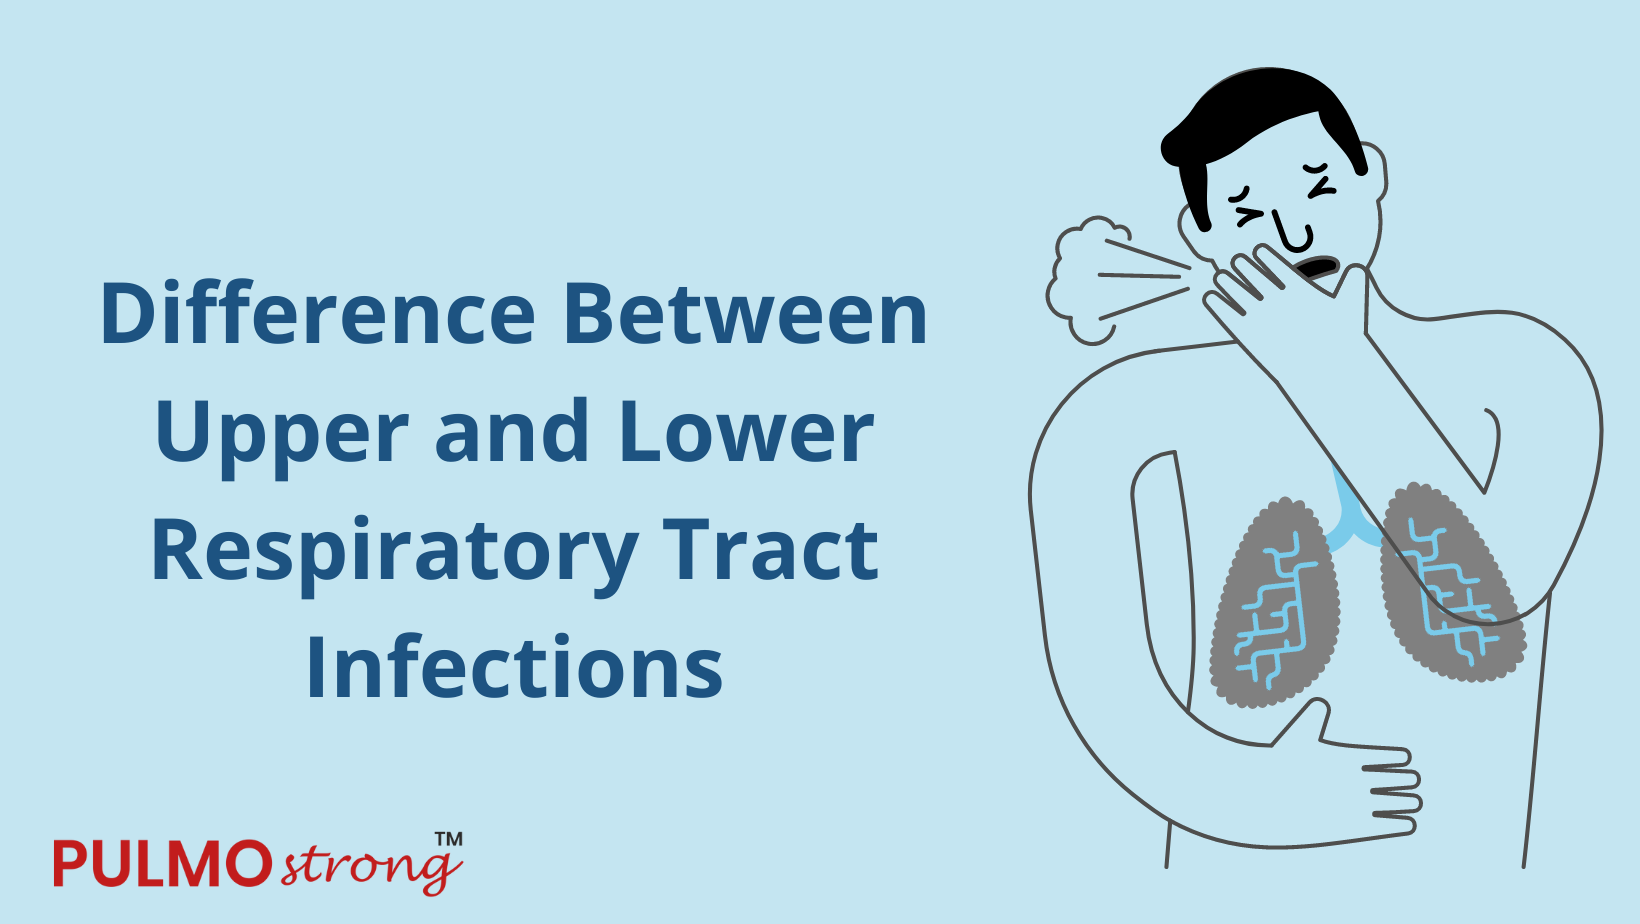 Difference Between Upper and Lower Respiratory Tract Infections